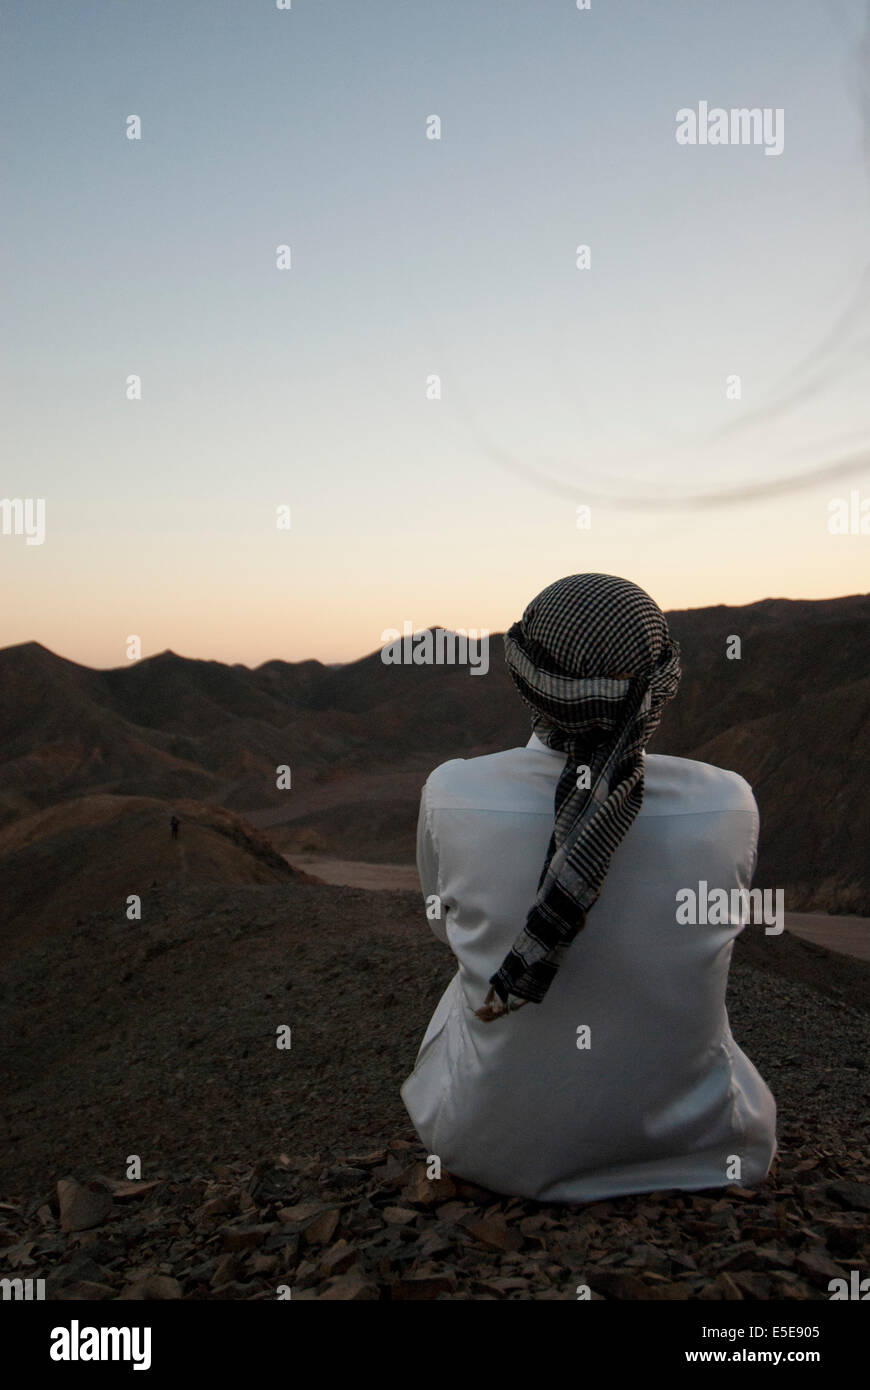 Bedouin man looks out over the desert during the sunset. Stock Photo